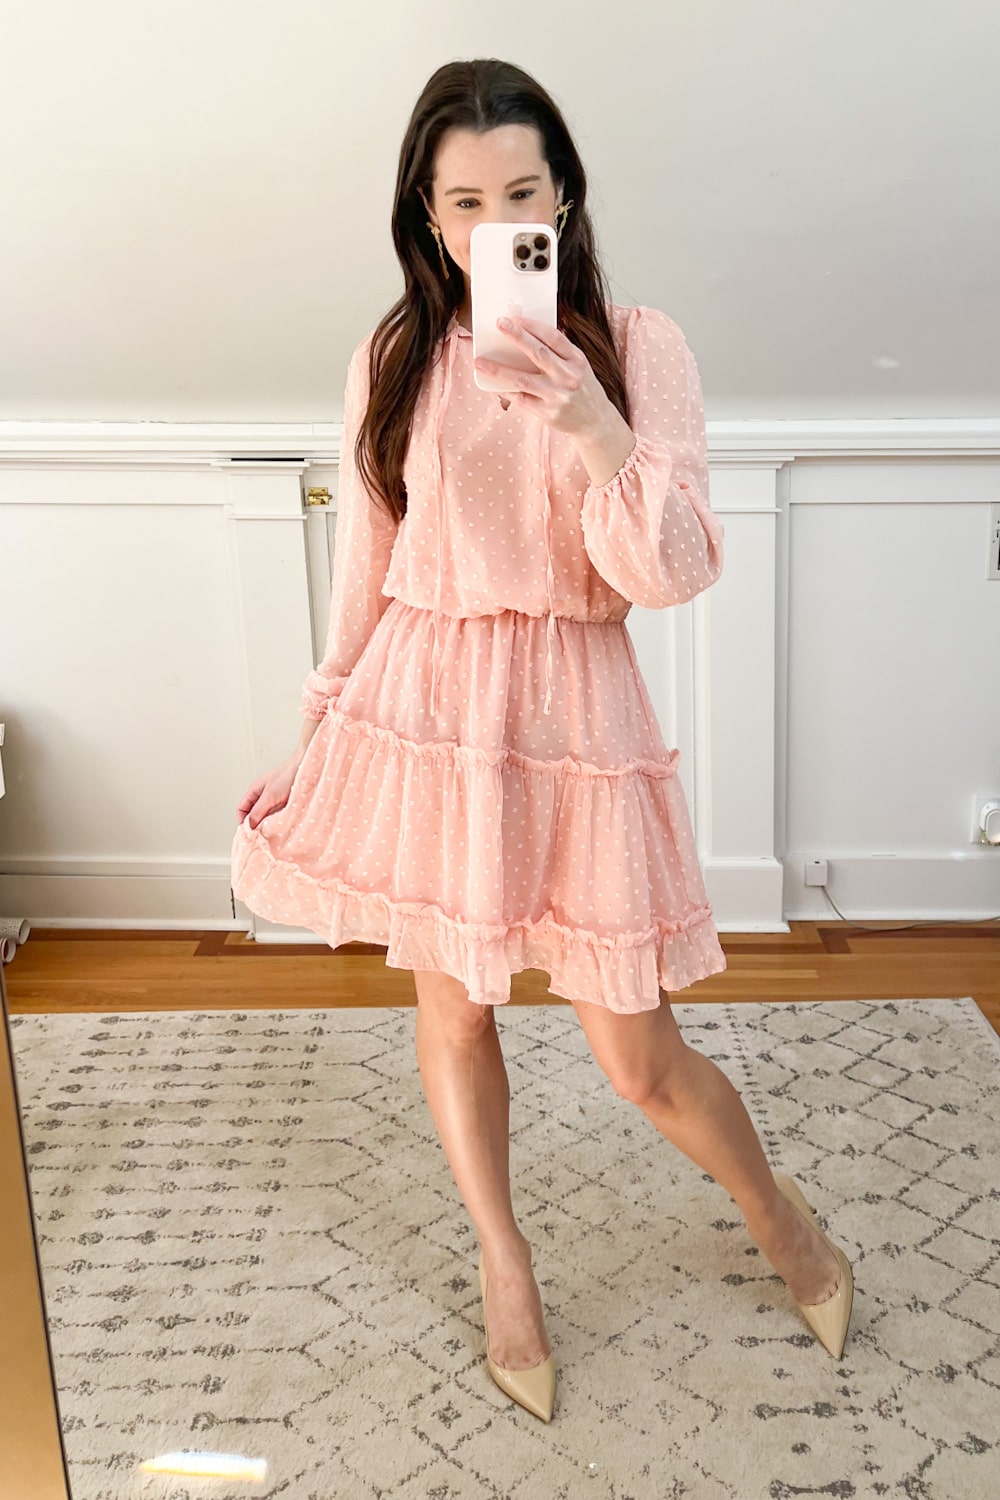 Affordable fashion blogger Stephanie Ziajka shares one of her favorite pink Christmas party dresses for women on Diary of a Debutante